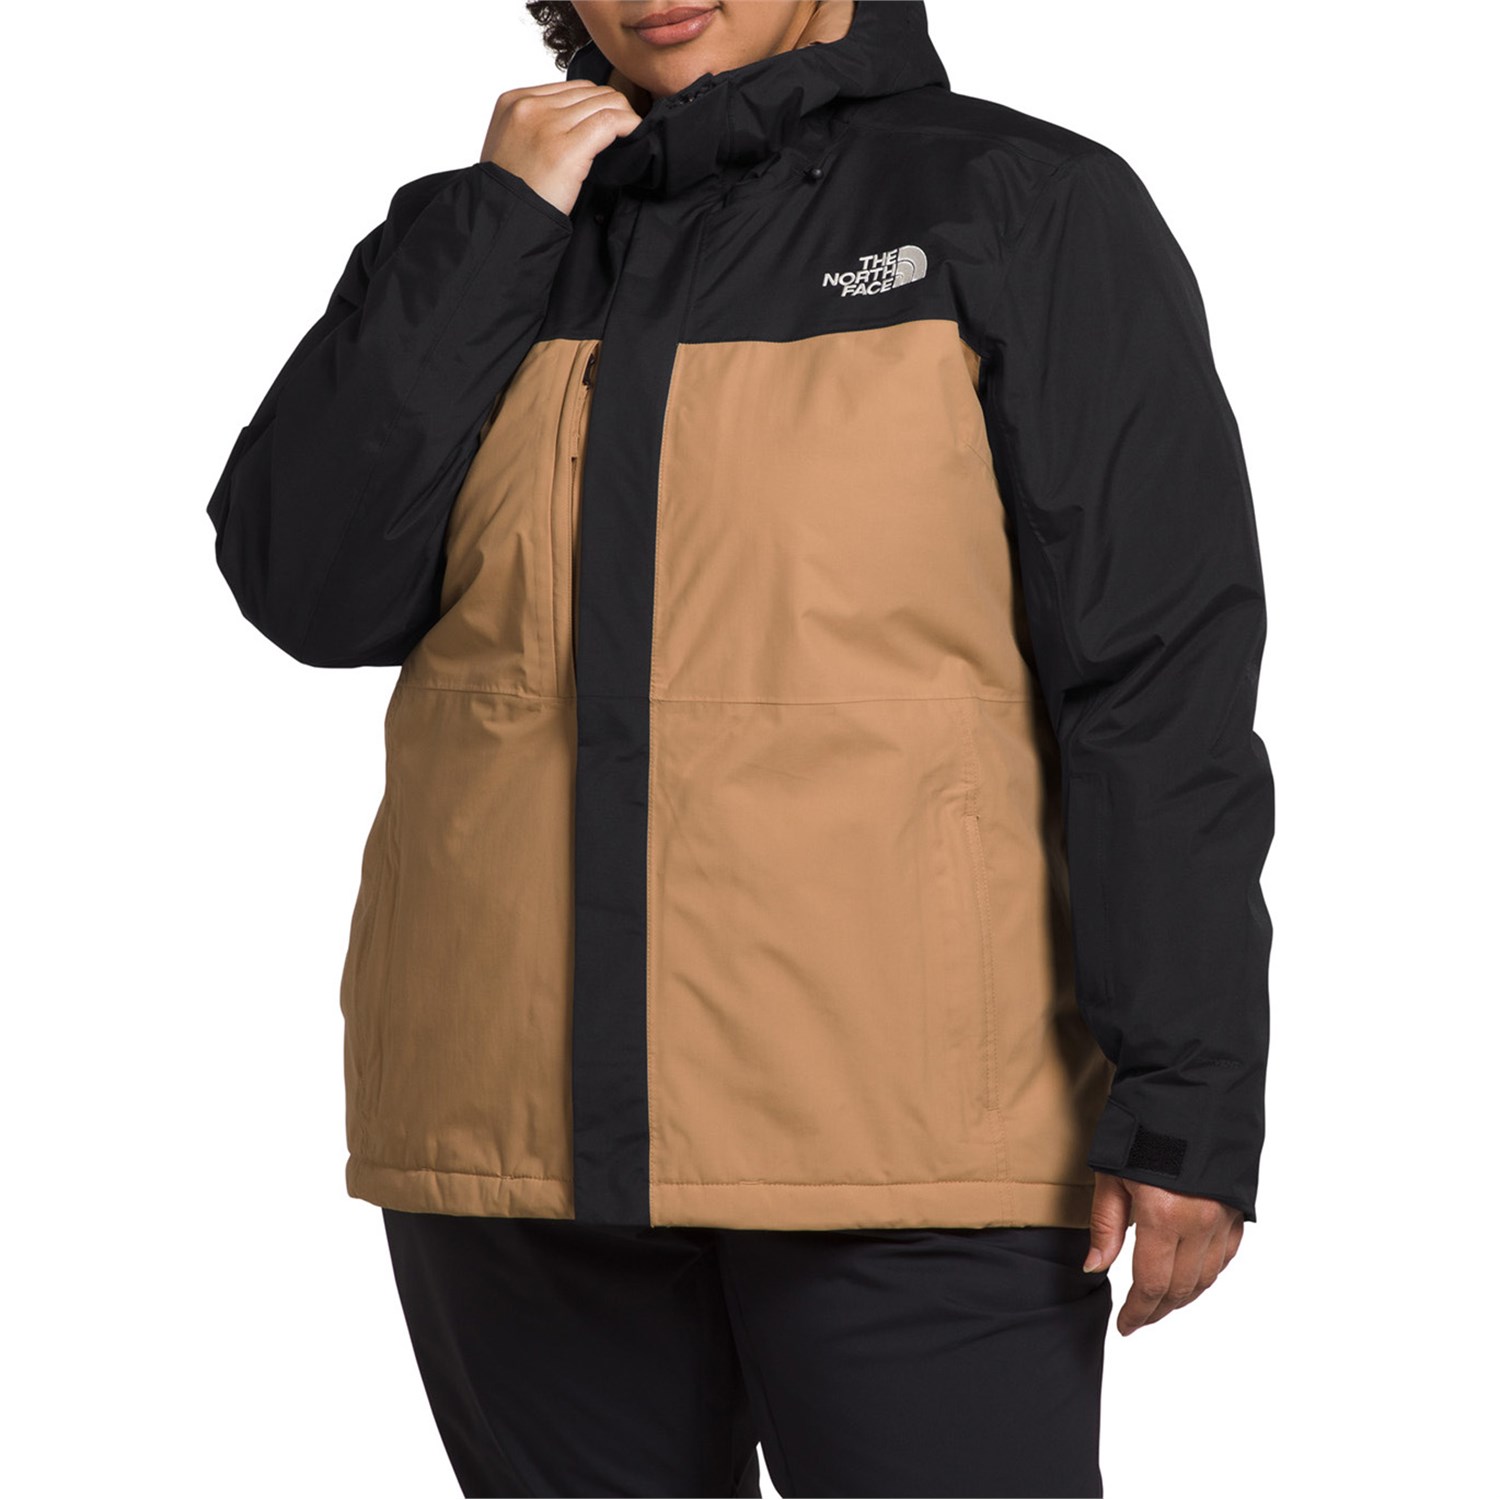 Куртка The North Face Freedom Insulated Plus, цвет TNF Black/Almond Butter куртка the north face freedom insulated цвет tnf black almond butter